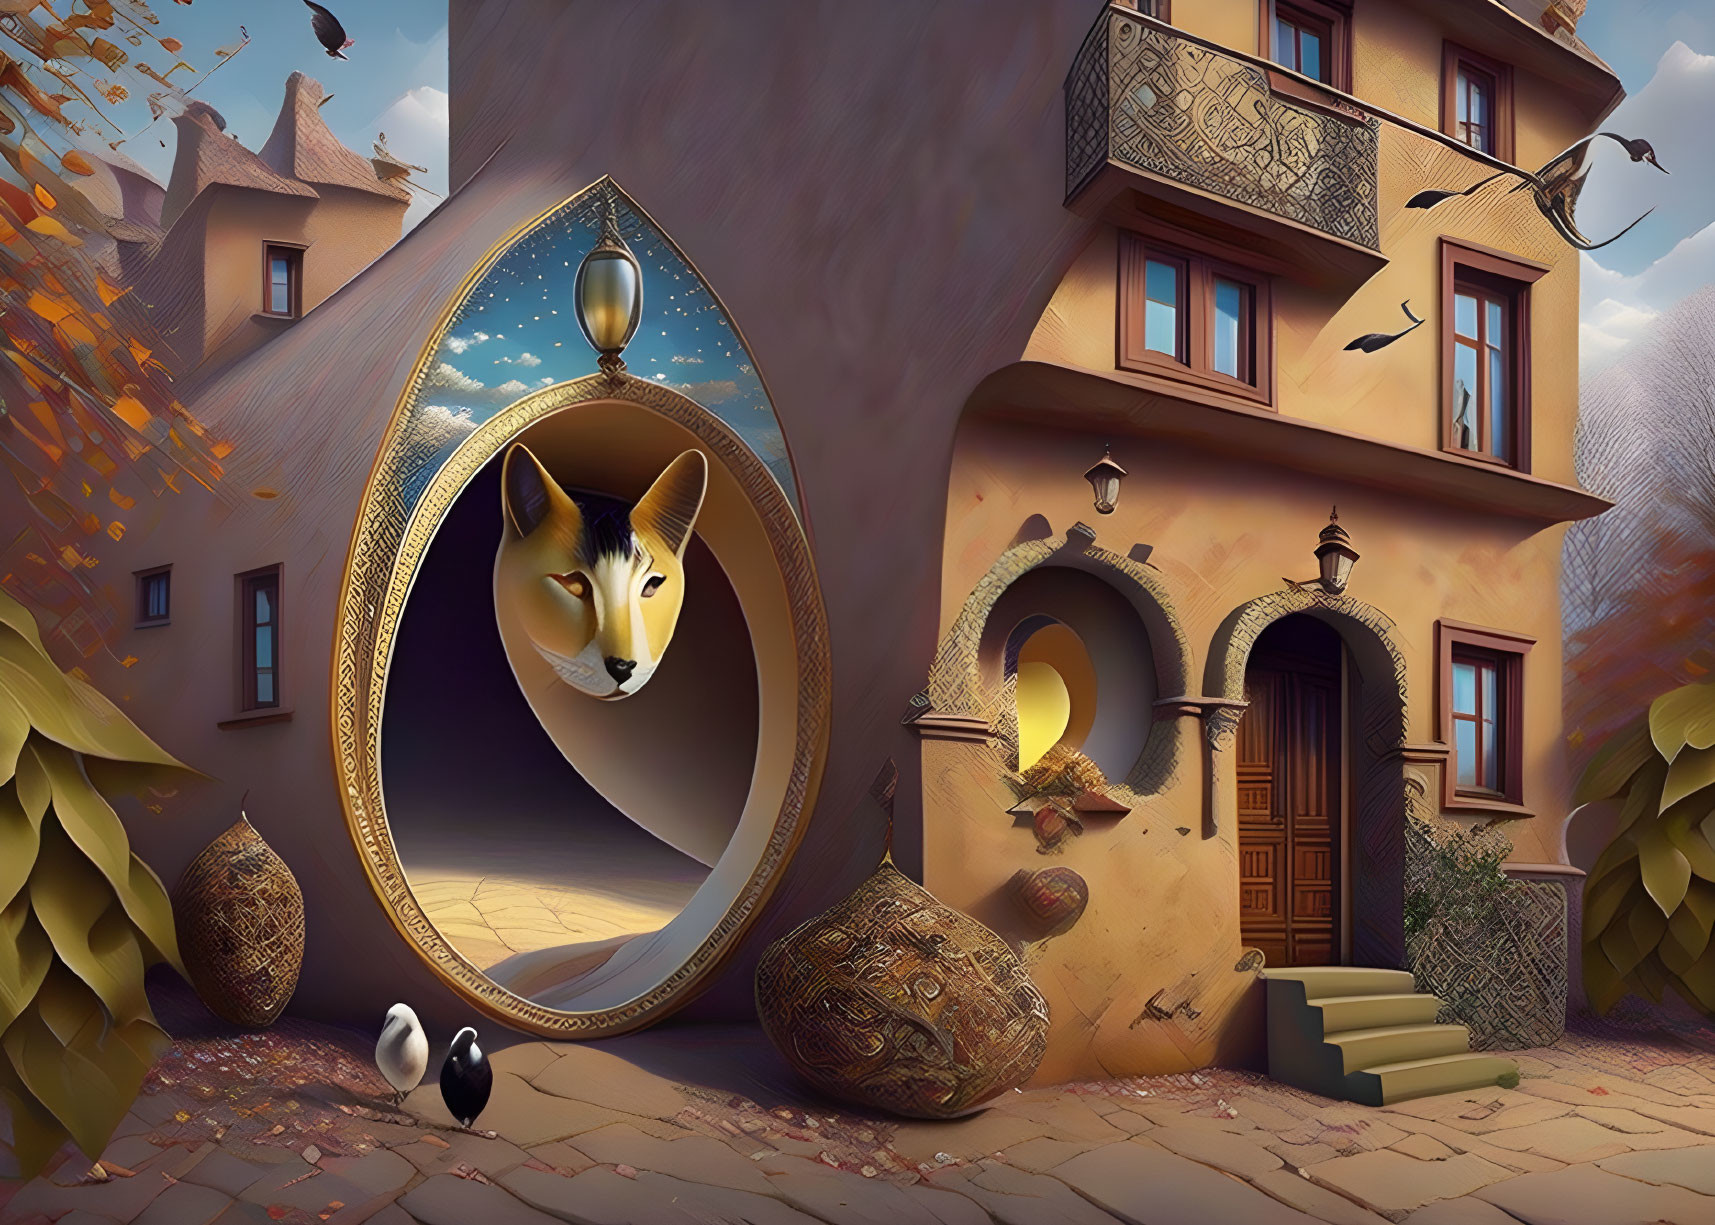 Surreal courtyard with cat-shaped door and floating objects